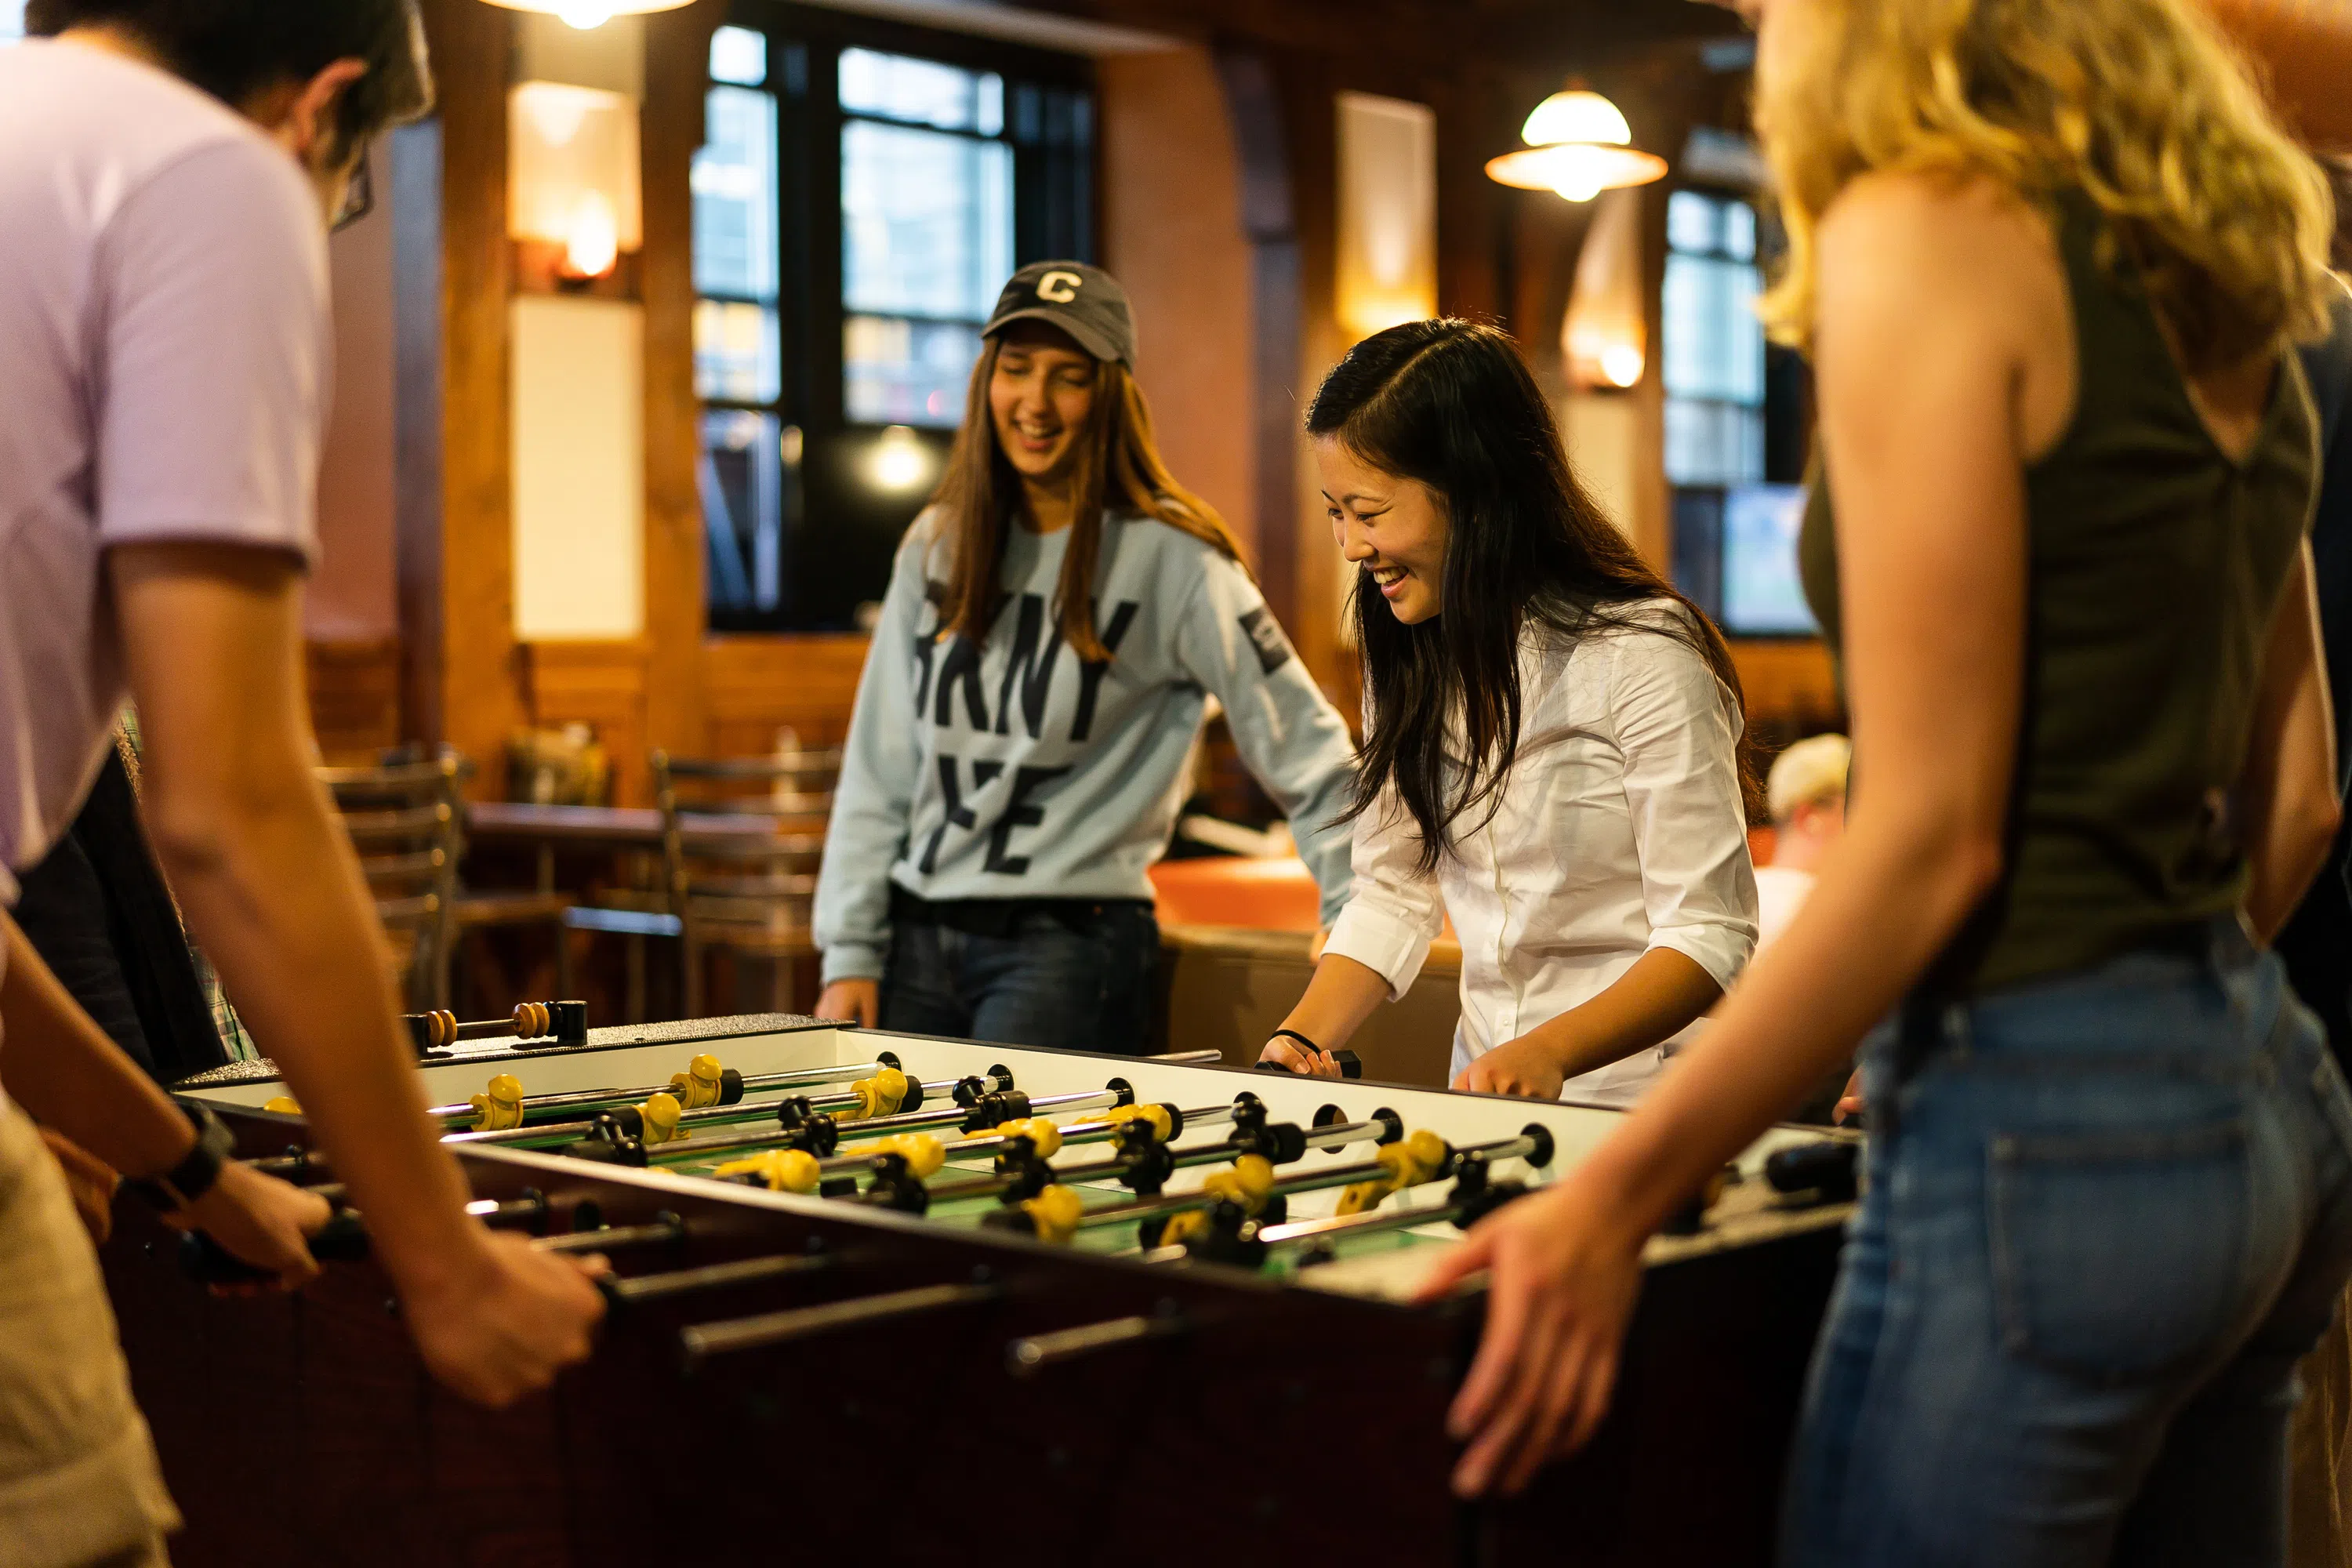 4 students play foosball in an on-campus dining hall